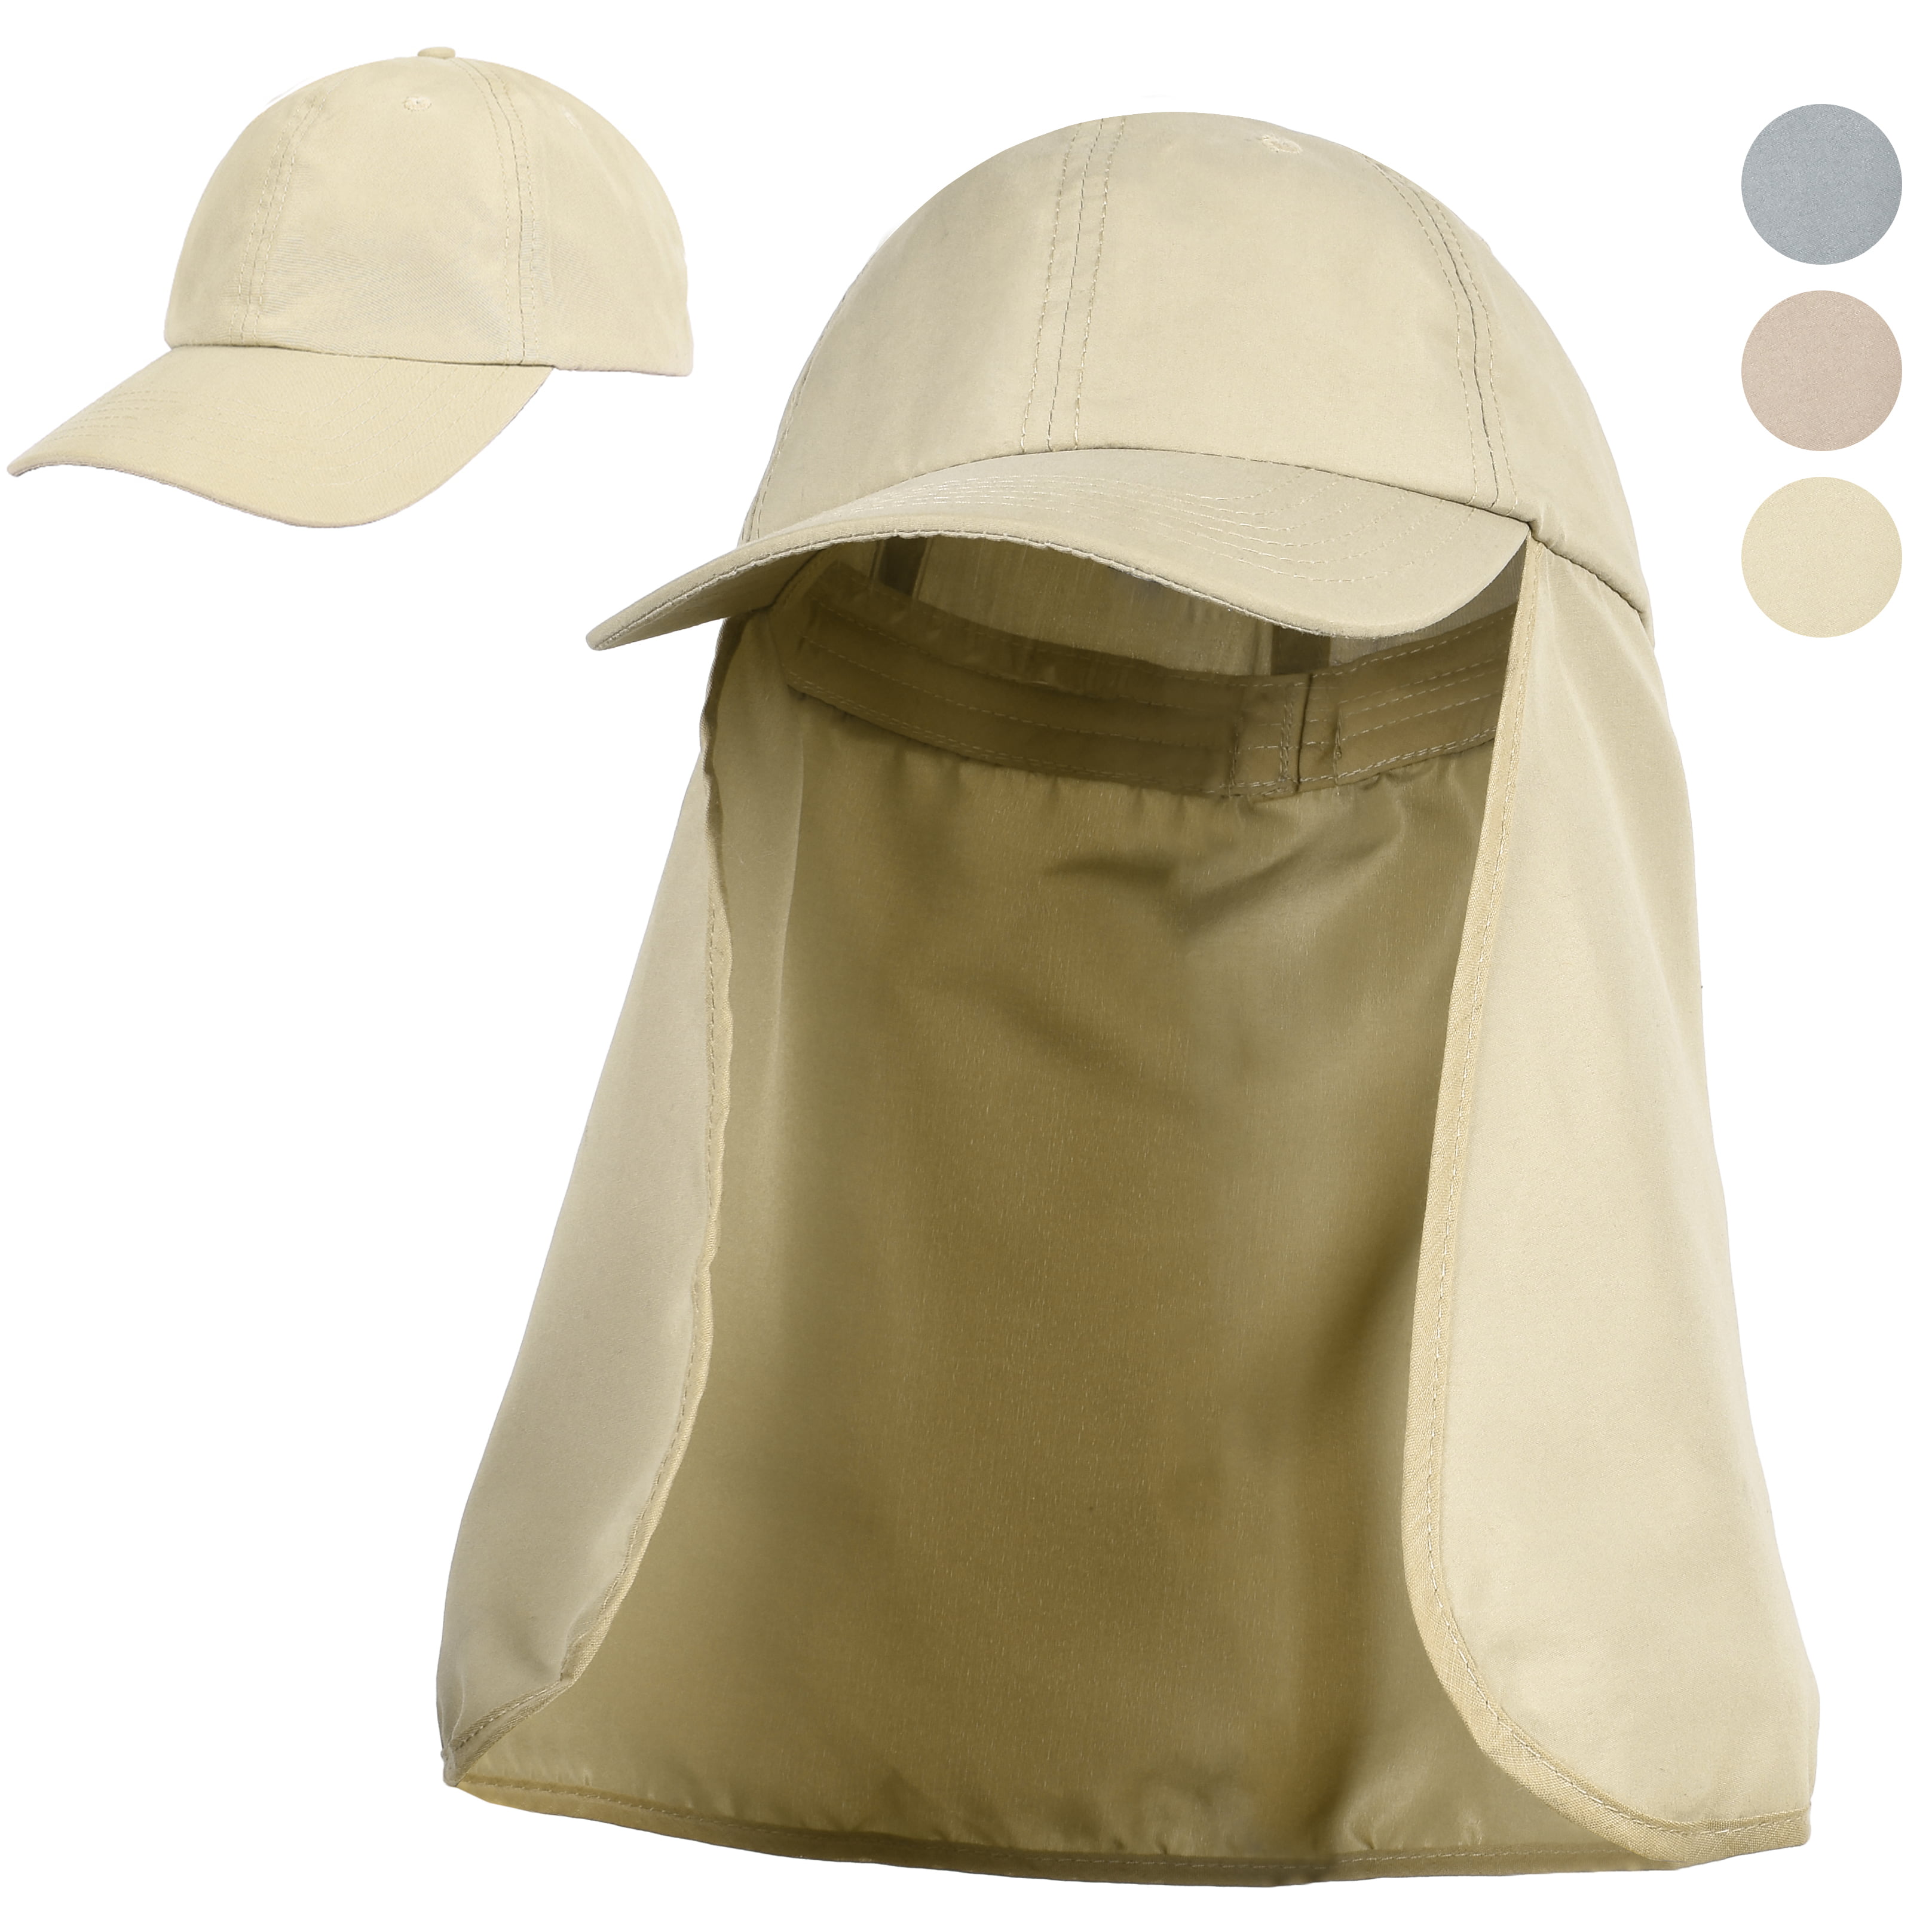 Fishing Hiking Baseball Hat Cap Neck Cover Ear Flap Outdoor UV Sun Protection